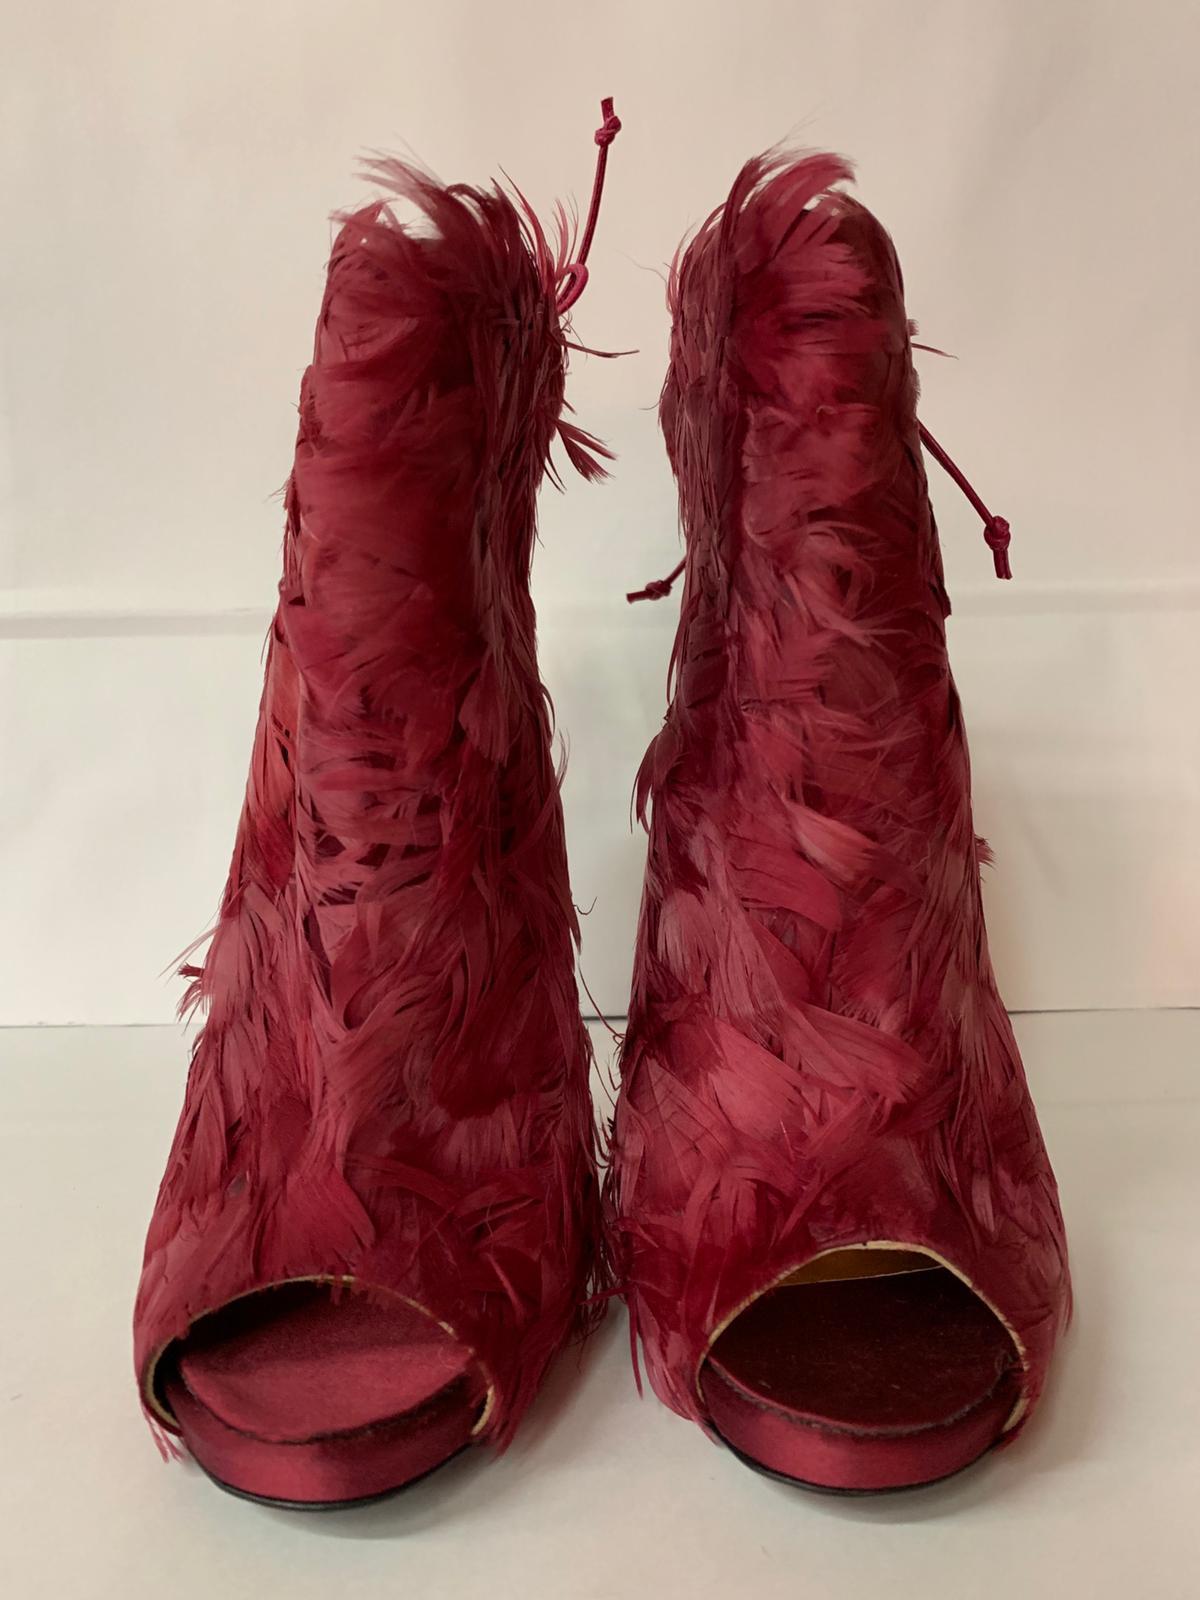 Tom Ford Red Sandal in ostrich feathers, used exclusively during the fashion show.
Heel 12.5 cm.
Size 40 reduced fit.